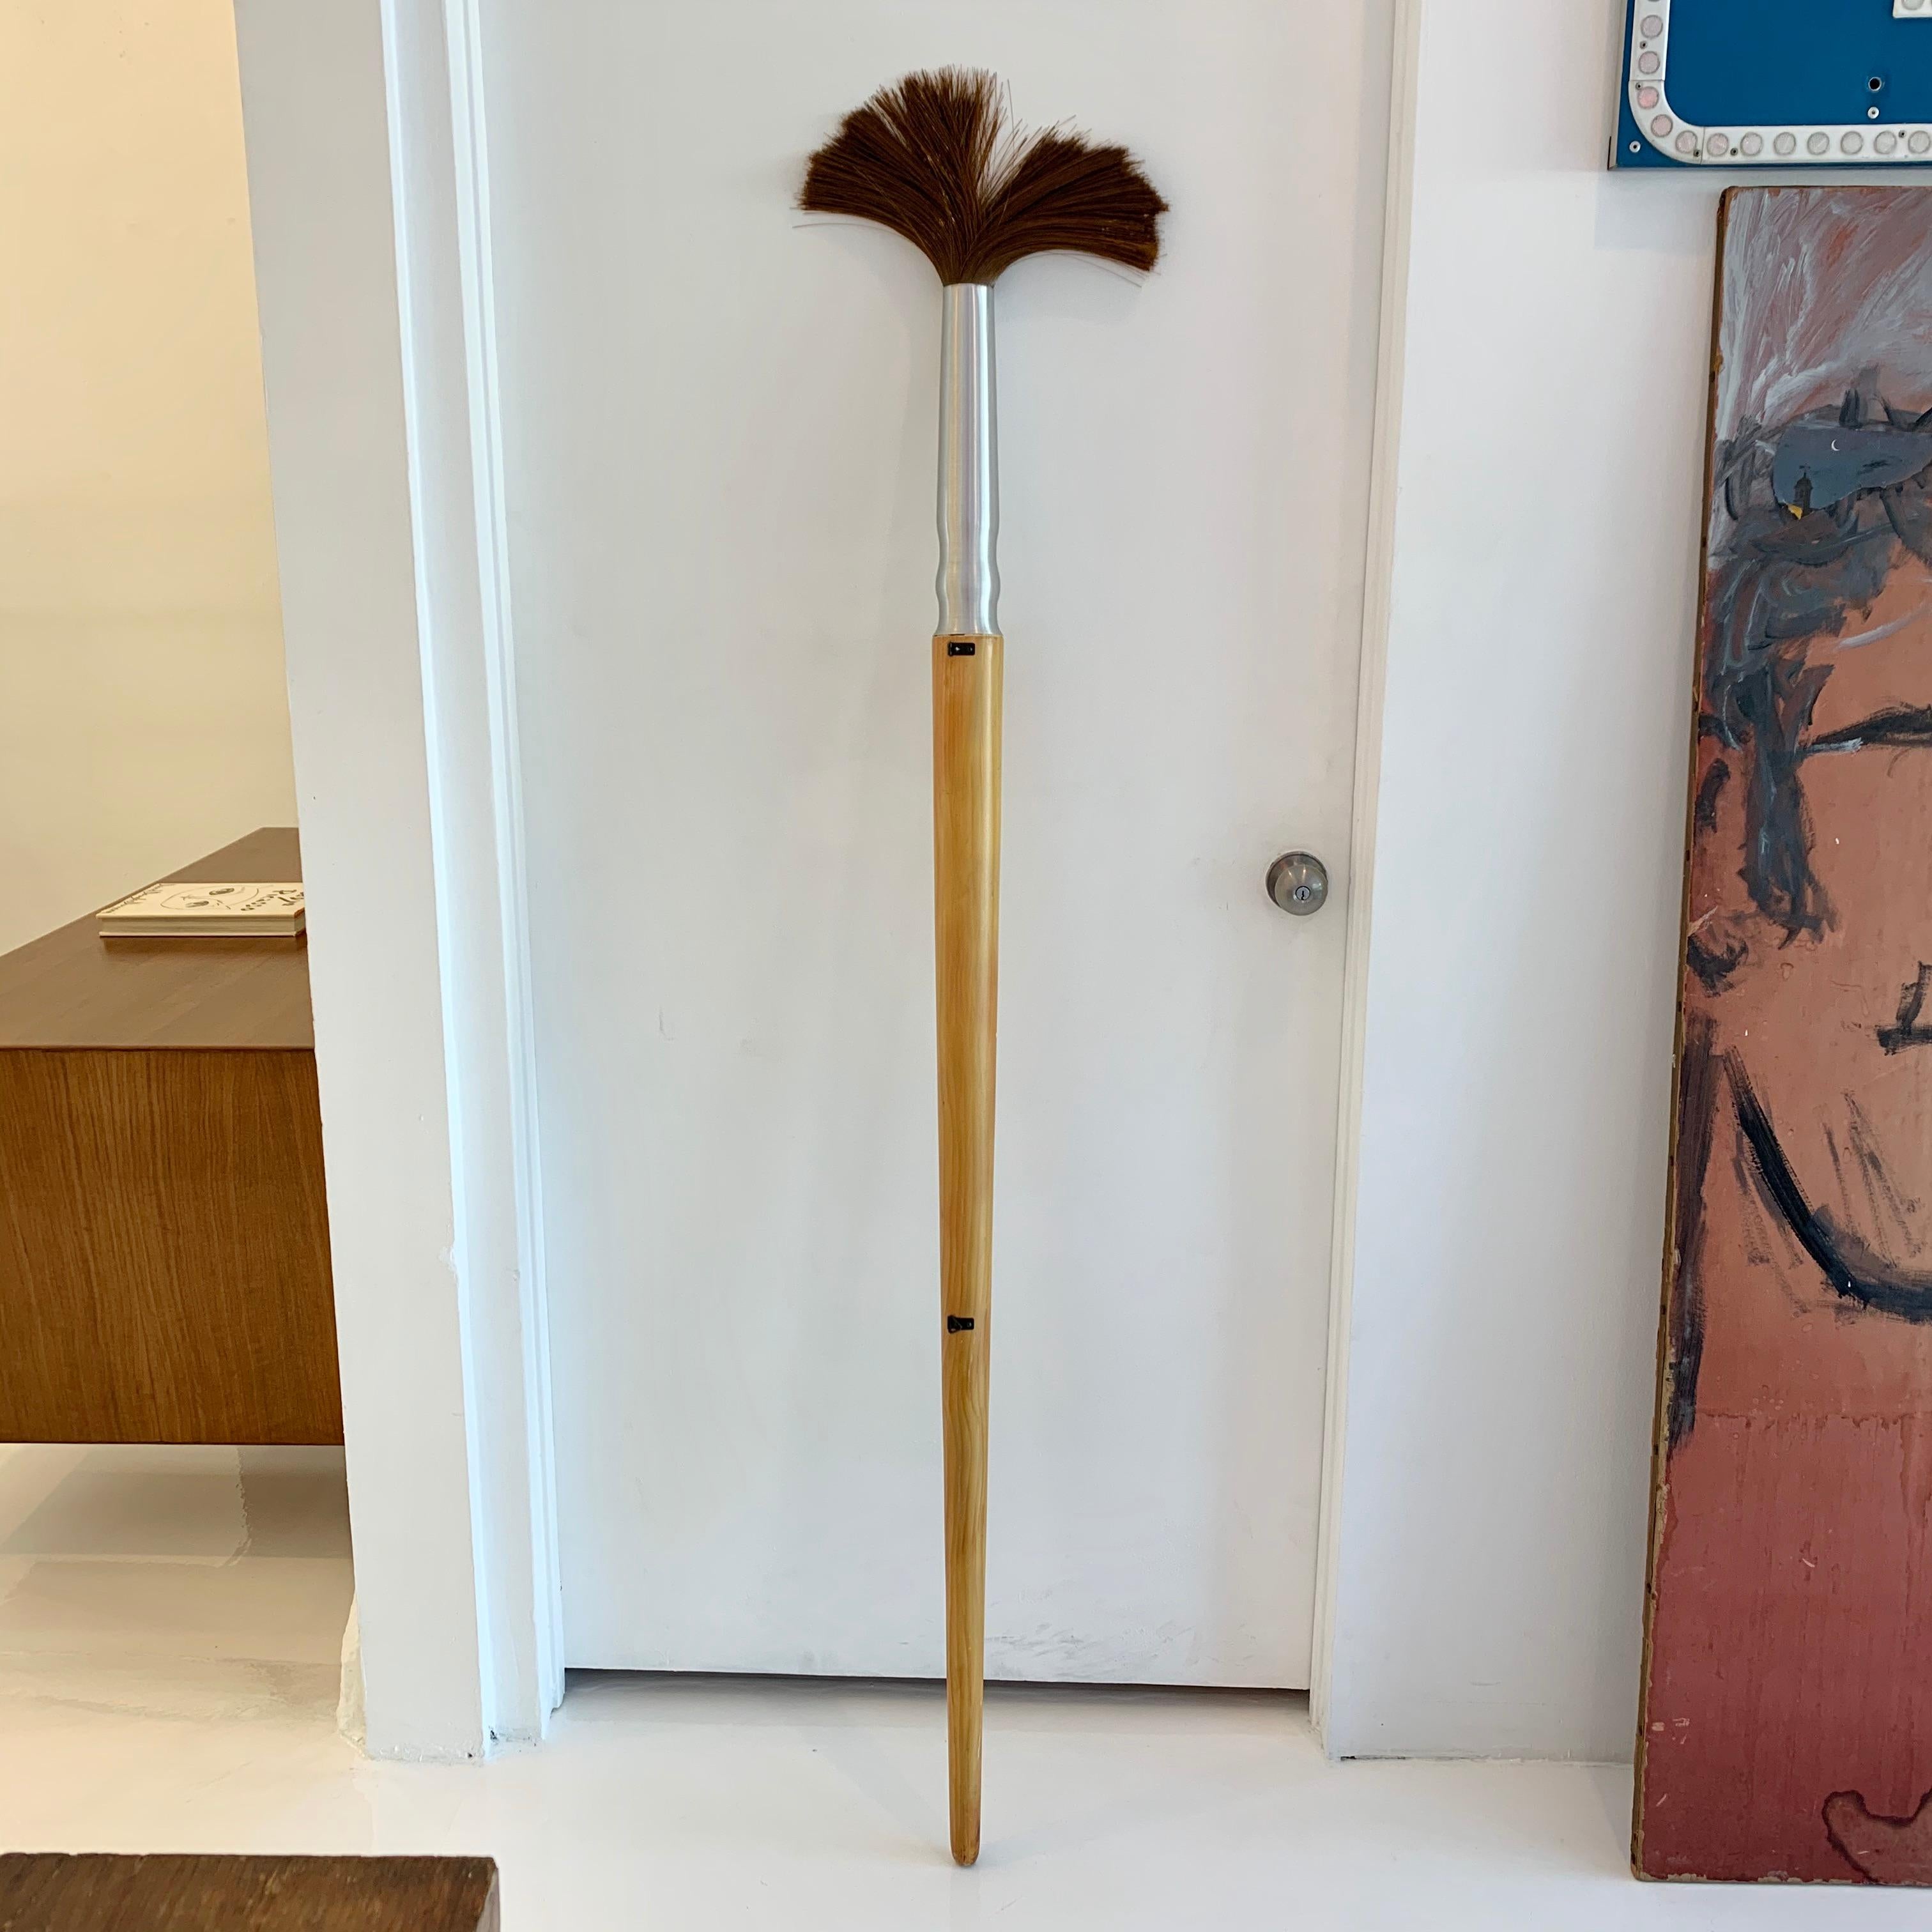 Massive 6 foot long pop art paint brush. Wood, chrome and bristles. In good vintage condition. Very unusual piece. Cool oversized object. 

  